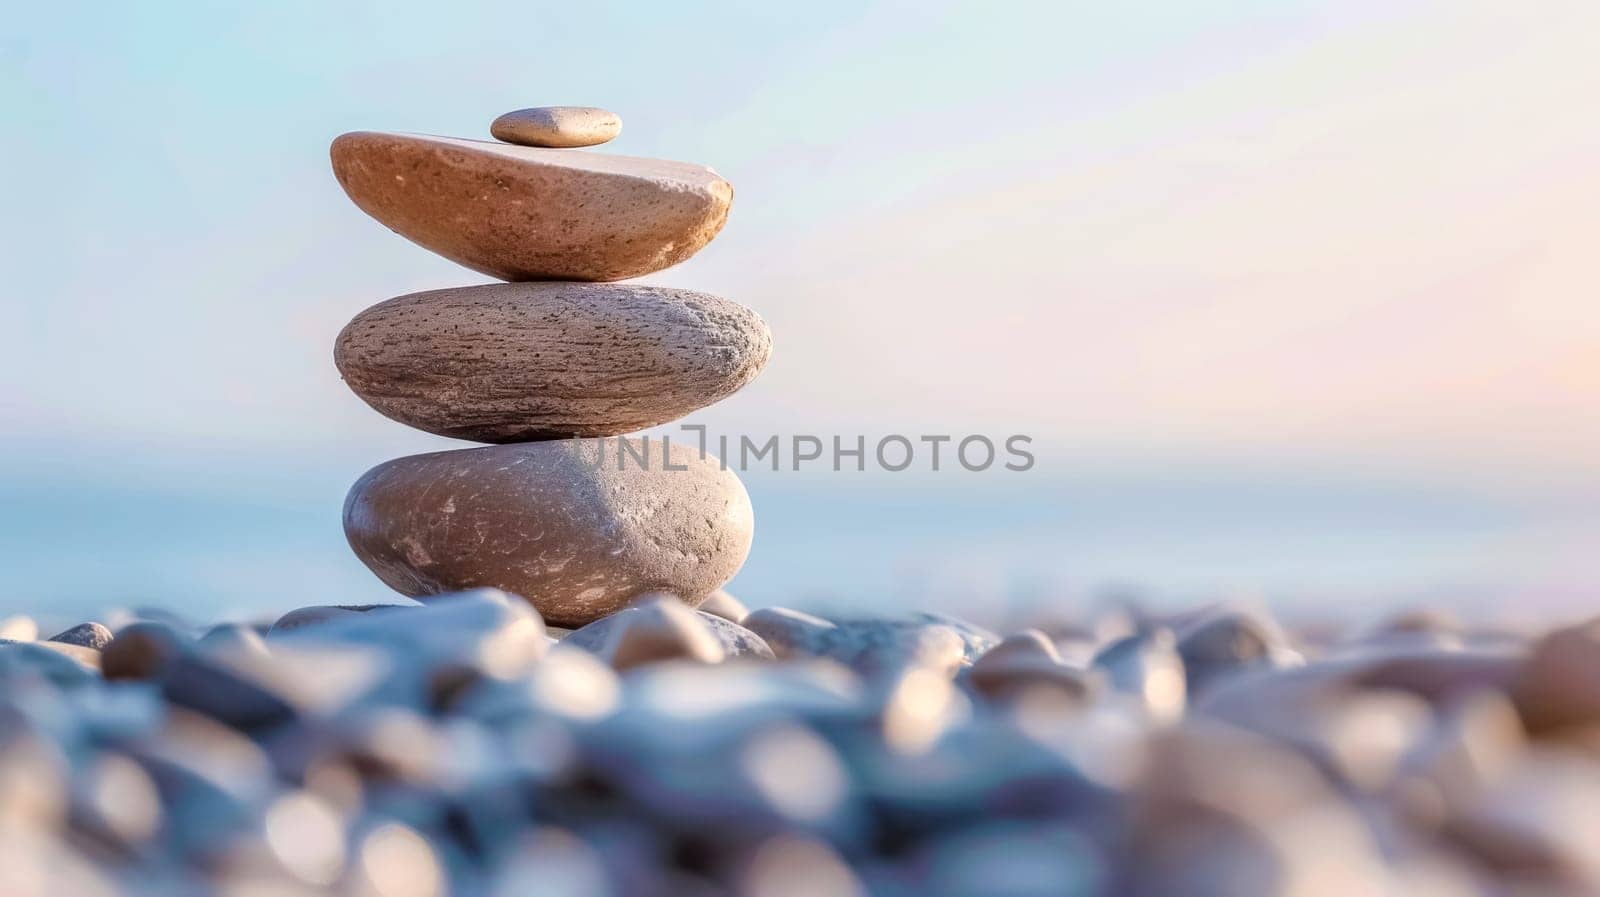 Zen-like arrangement of smooth stones by the sea during a calm sunset